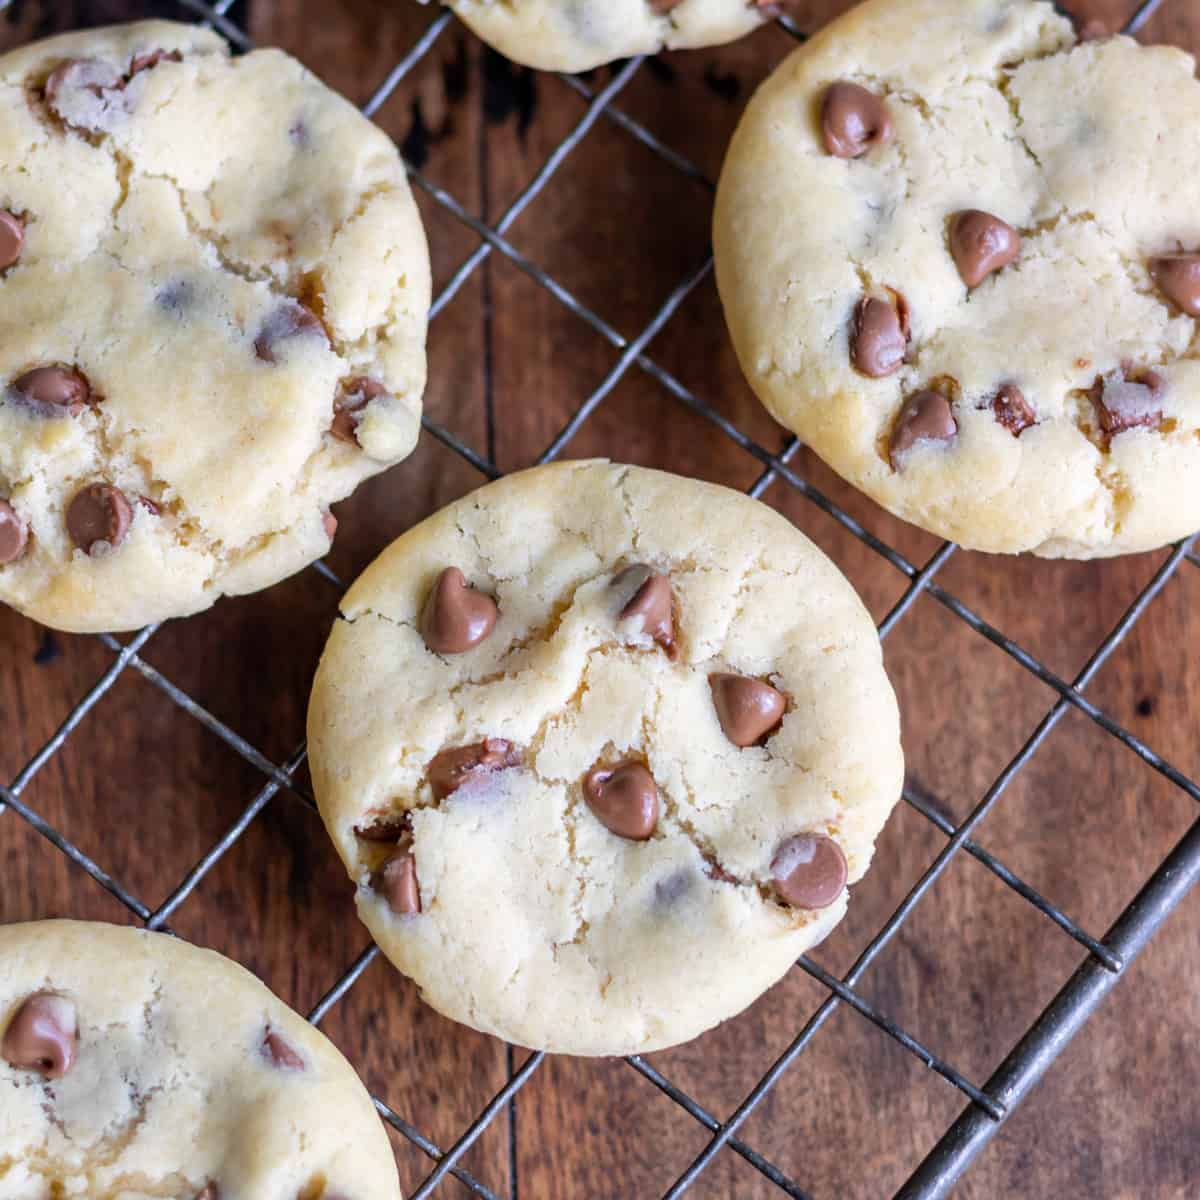 Chocolate chip condensed milk cookies cooling on a wire rack.